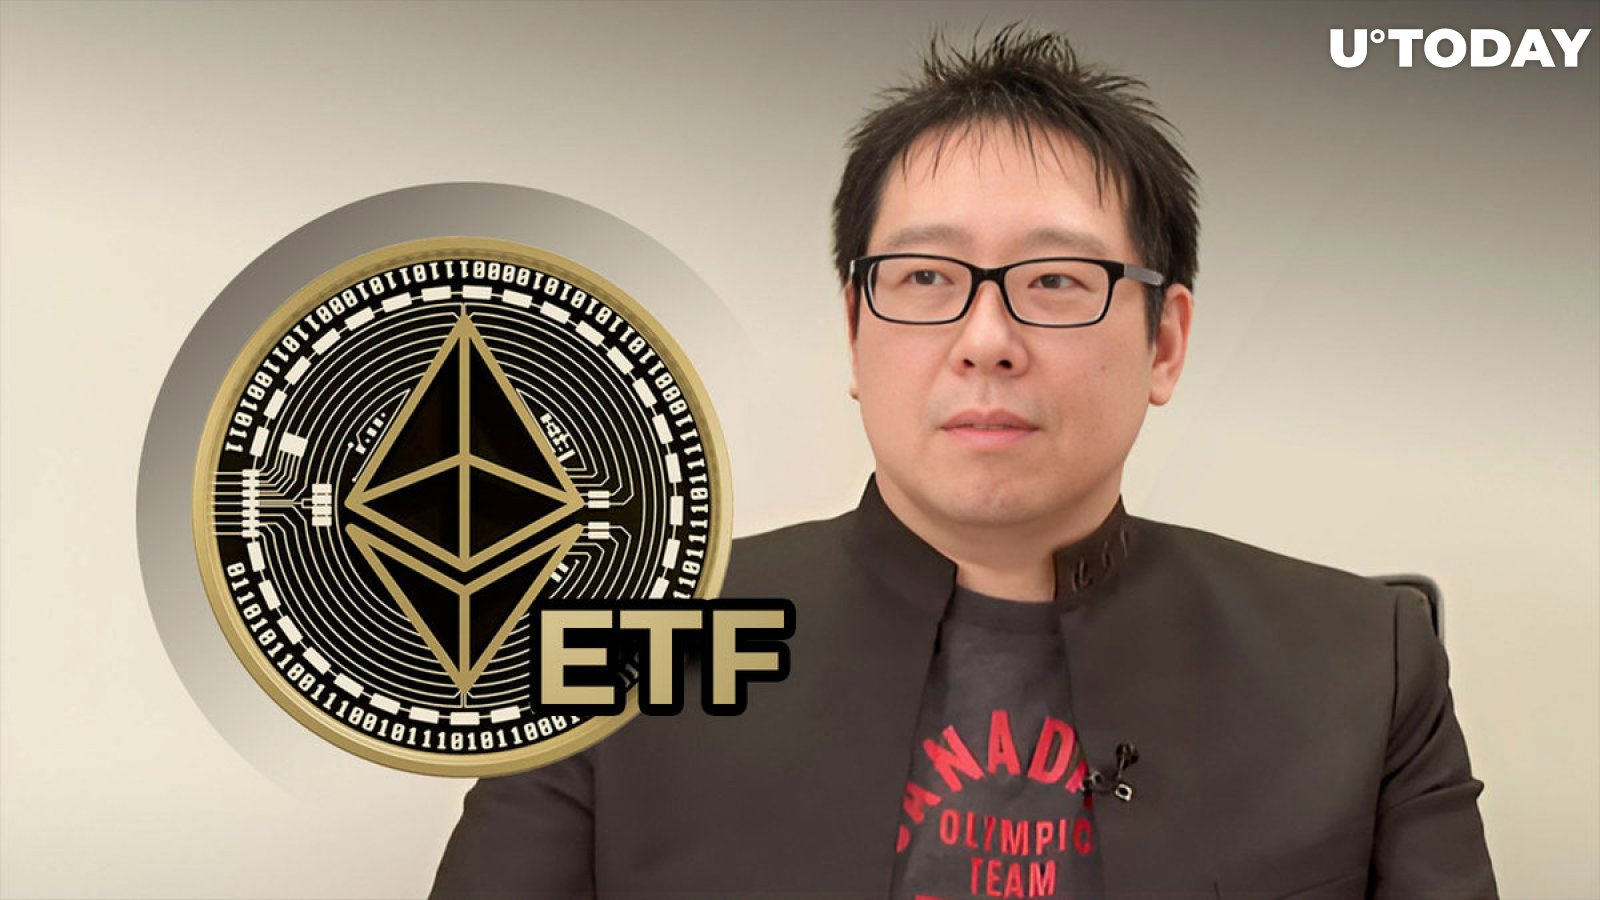 Crucial Negative Ethereum ETF Statement Made by Samson Mow, Here’s His Message